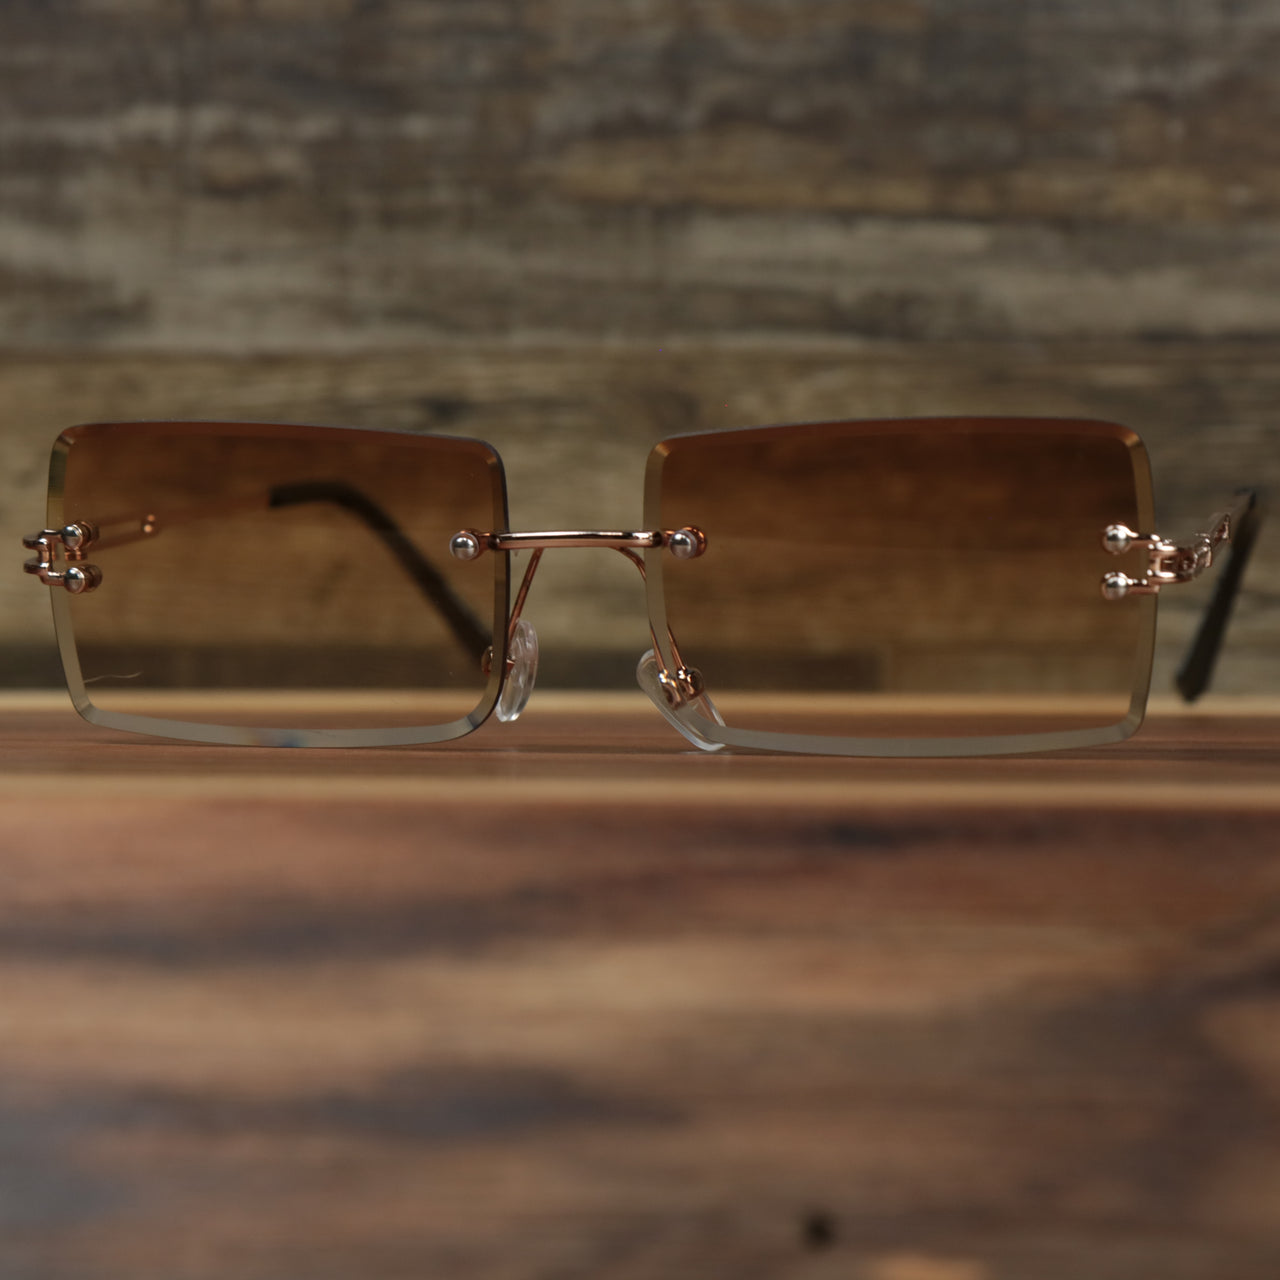 The Rectangle Frame Brown Lens Sunglasses with Gold Frame